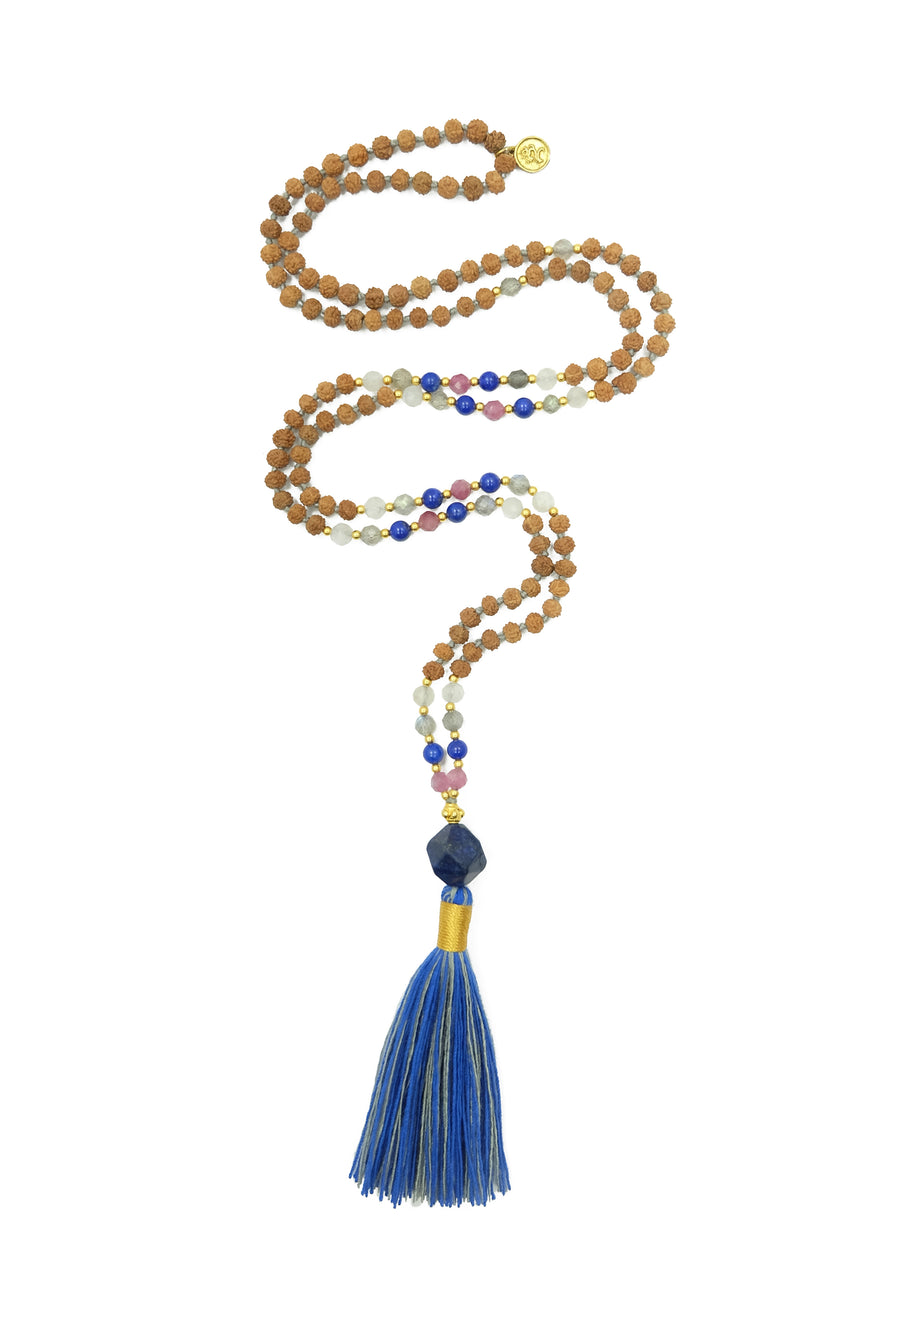 The Blue Moon Mala from balimalas.com is handcrafted with rudrani seeds, moonstone, labradorite and tourmaline gemstone with 22k gold accents.